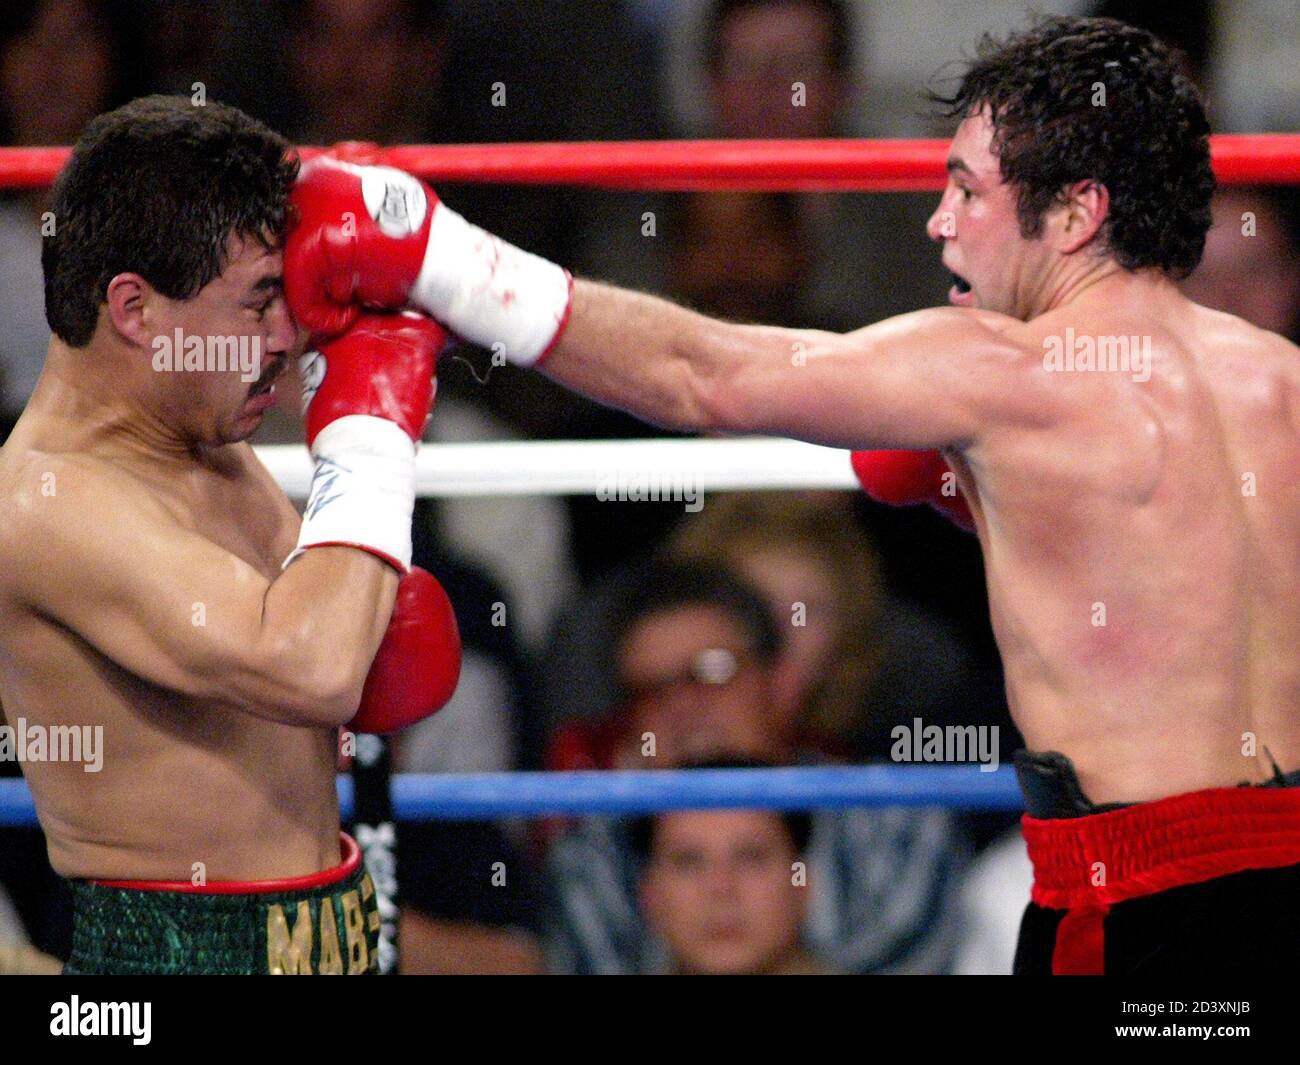 Oscar De La Hoya of Los Angeles, California, (R) connects to the head of Yory Boy Campas of Navojoa, Mexico, in the second round at the Mandalay Bay Events Center in Las Vegas, Nevada, May 3, 2003. De La Hoya retained his WBC/WBA welterweight title when the referee stopped the fight in the seventh round. Picture taken May 3, 2003. REUTERS/Ethan Miller  EM/HB Stock Photo